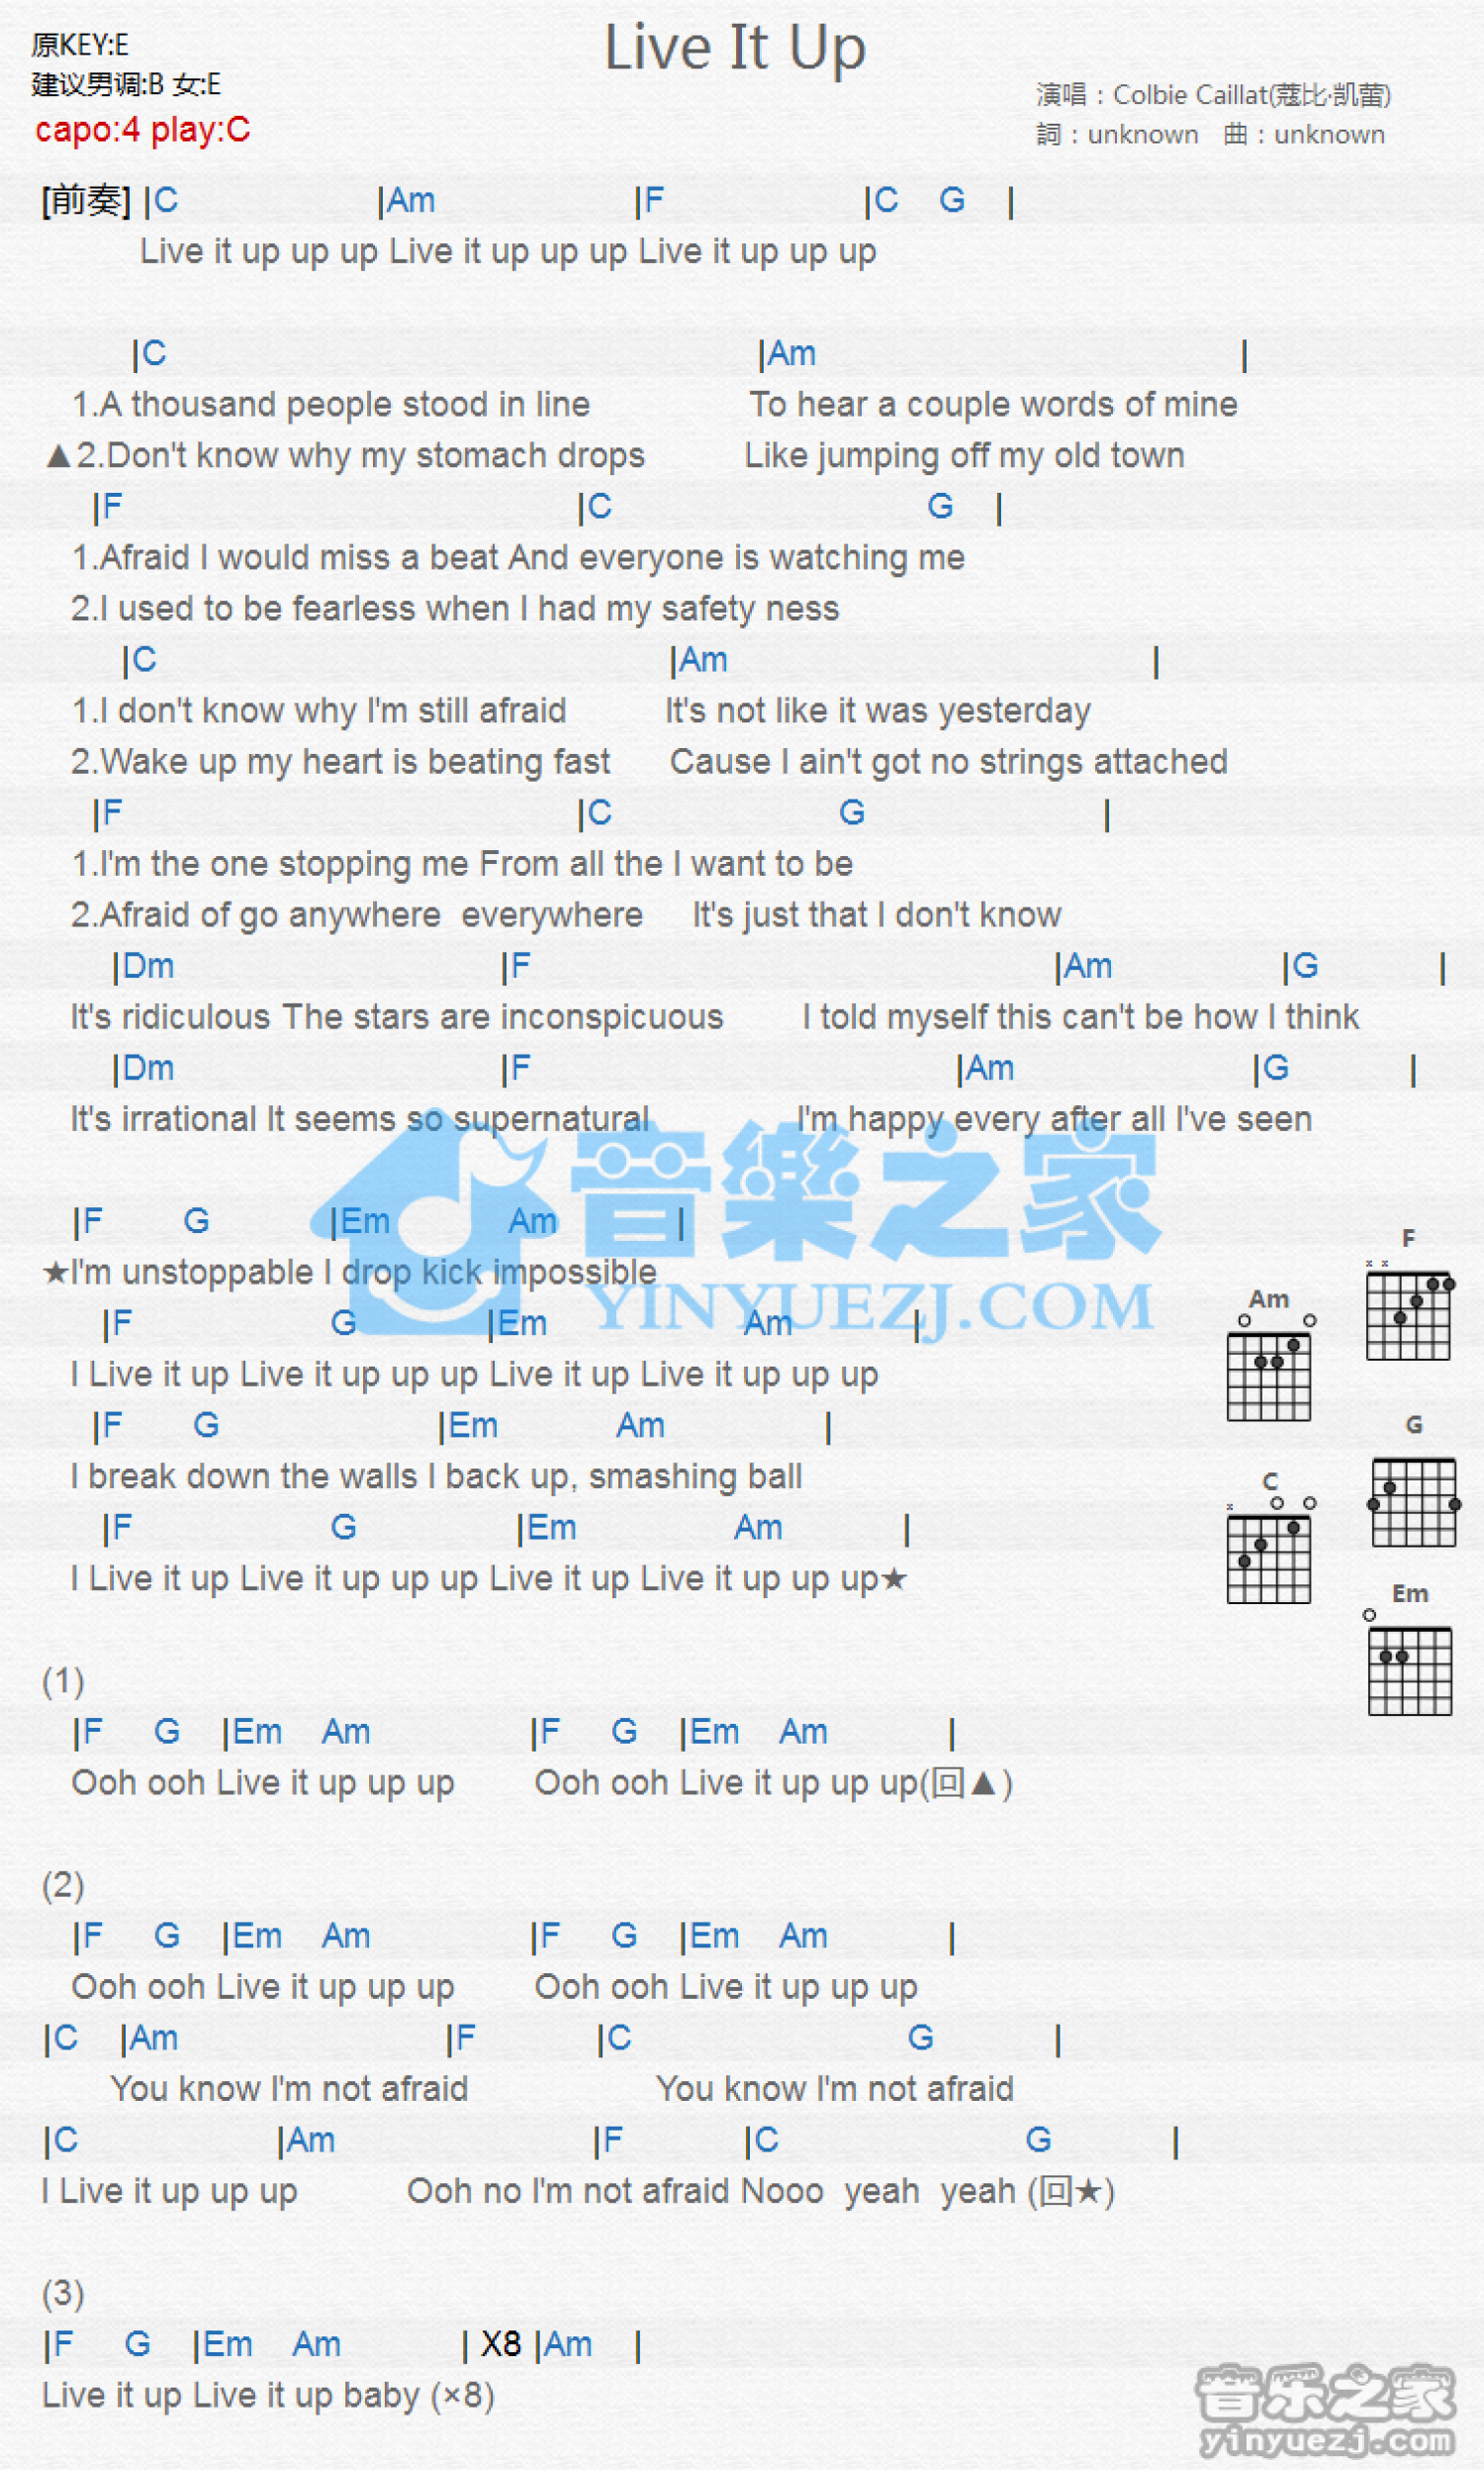 Song lyrics with guitar chords for Stir It Up